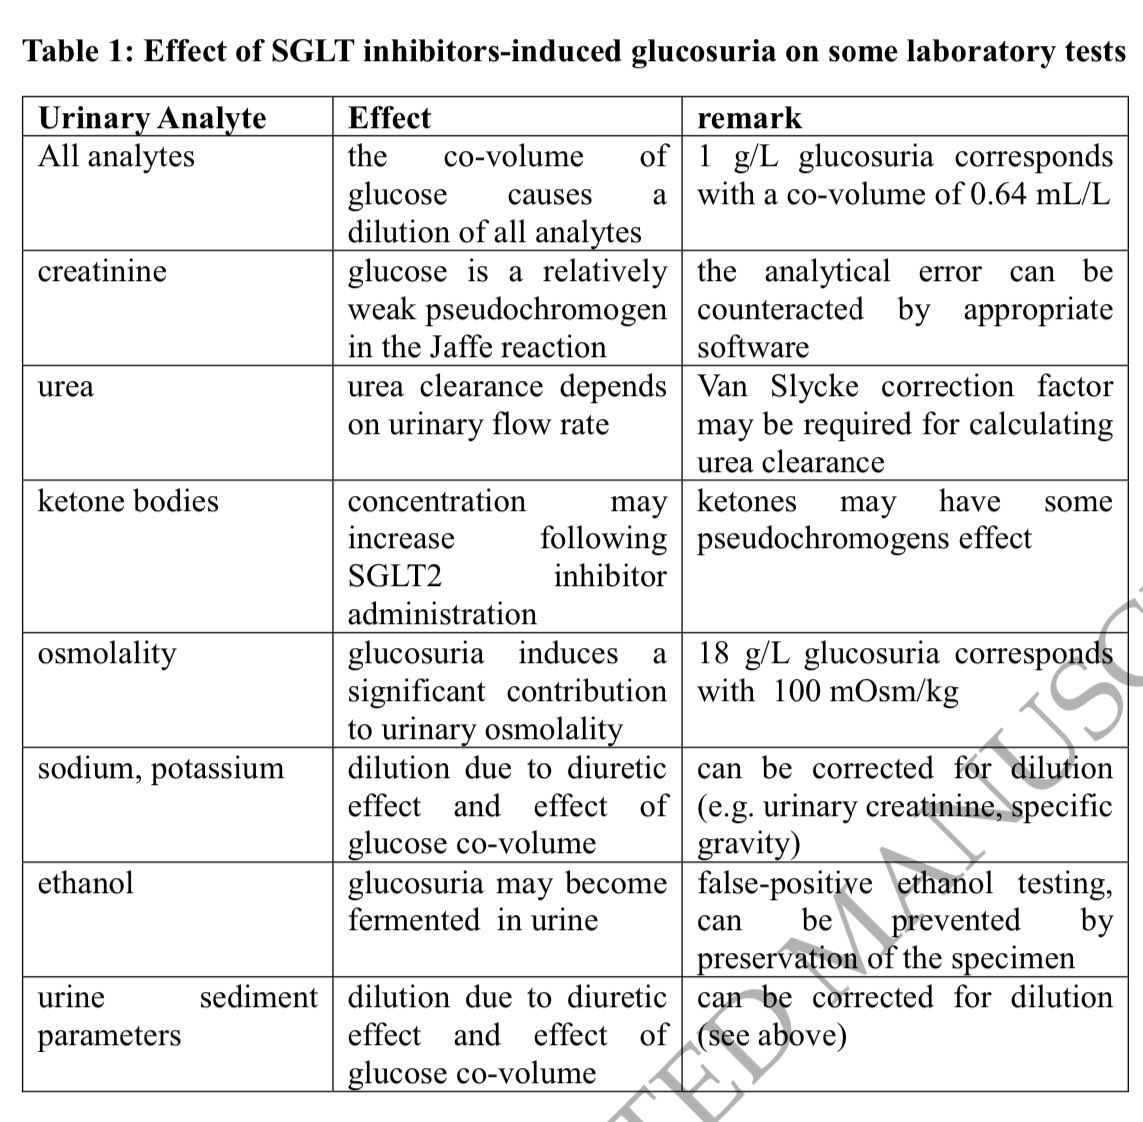 🔴Effects of SGLT2 inhibitors on routine urinary analysis ✅academic.oup.com/ndt/advance-ar… #medtwitterWhat #MedTwitter #CardioEd #medx #medEd #CardioTwitter #cardiotwitter #MedX #MedEd #cardiology #cardiotwiteros #FOAMed #medicine #cardiox #medical